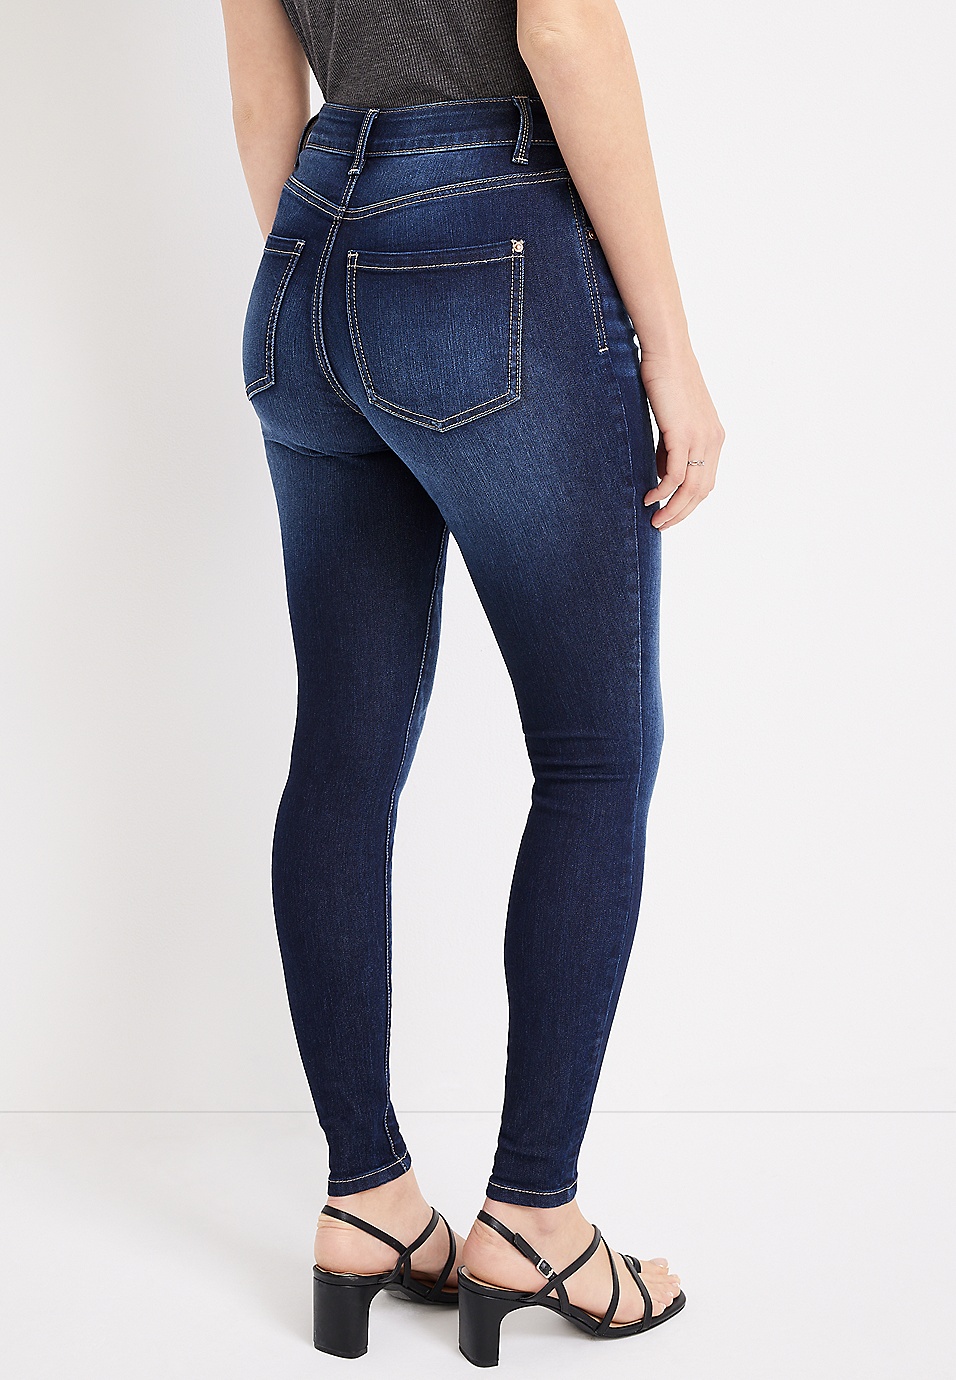 Four Way Flex High Rise Skinny Jeans for Women (FINAL SALE)